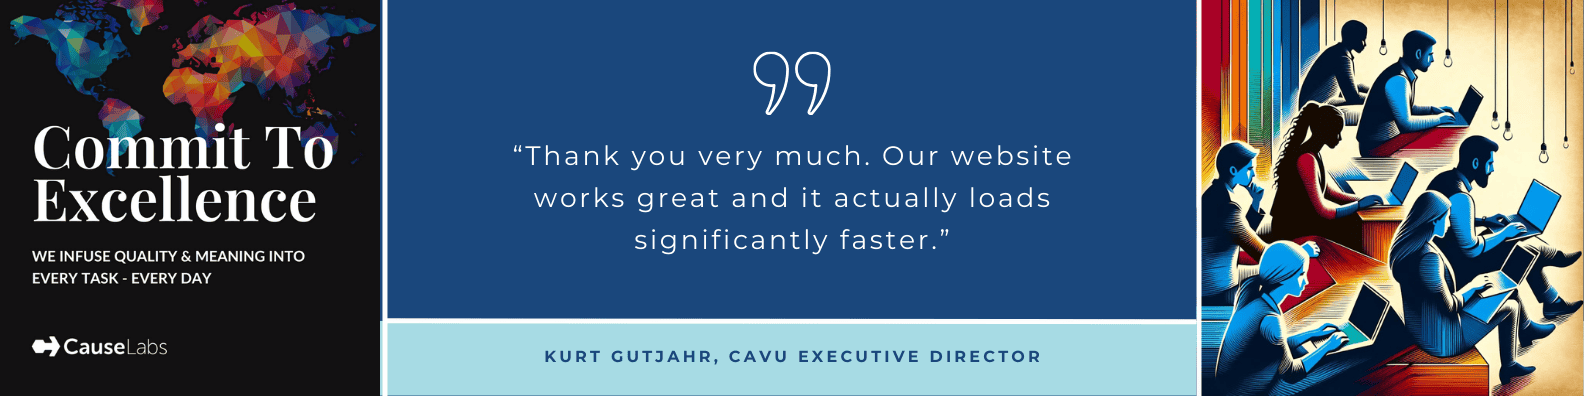 "Thank you very much. Our website works great and actually loads significantly faster." – Kurt Gutjahr, Executive Director, CAVU